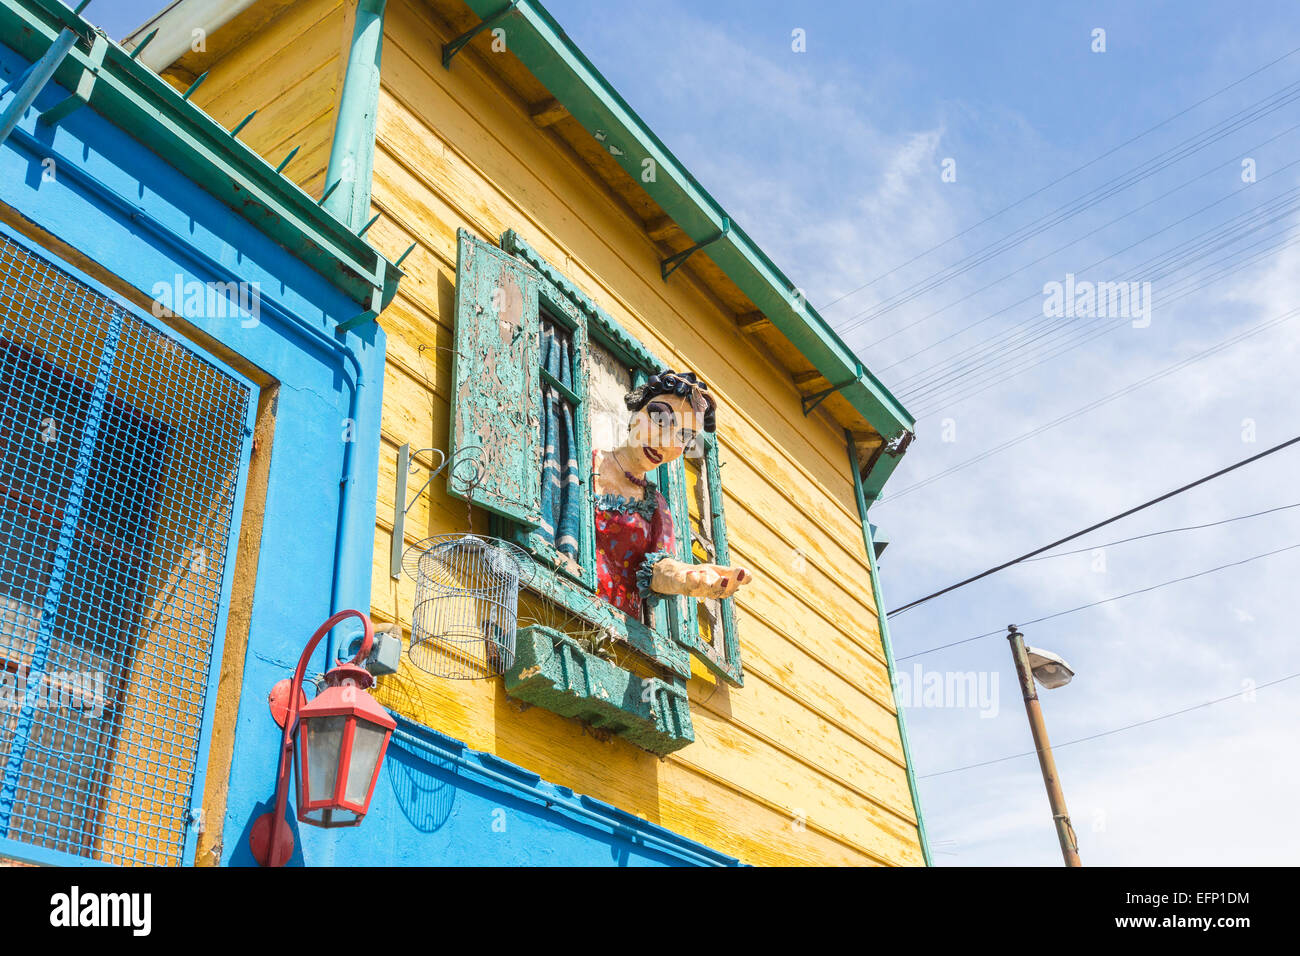 Colourful effigy of a local woman in hair curlers leaning out of a window in La Boca, Buenos Aires, Argentina Stock Photo